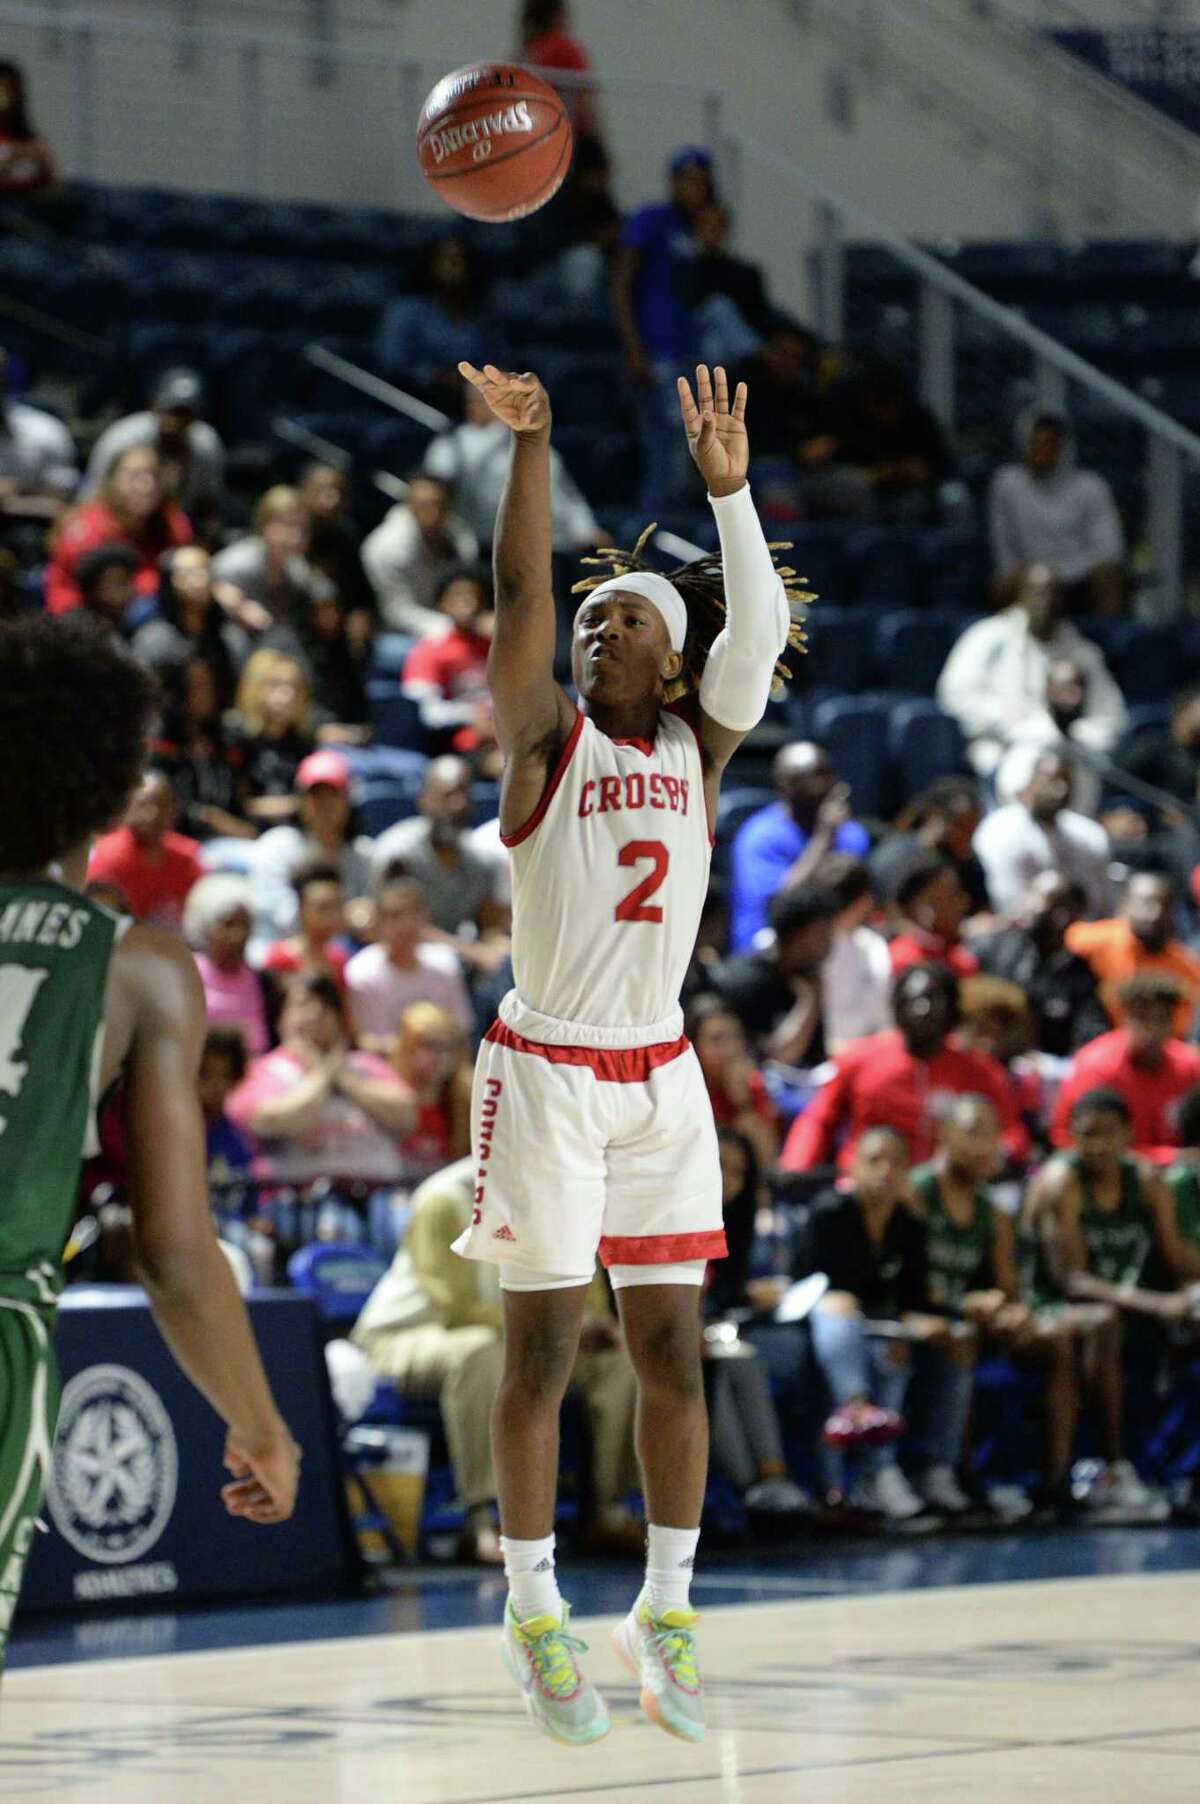 Deniquez Dunn (2) of Crosby attempts a jump shot during the fourth quarter of the Boys 5A Region III Quarterfinal basketball game between the Hightower Hurricanes and the Crosby Cougars on Tuesday, March 3, 2020 at Delmar Fieldhouse, Houston, TX.